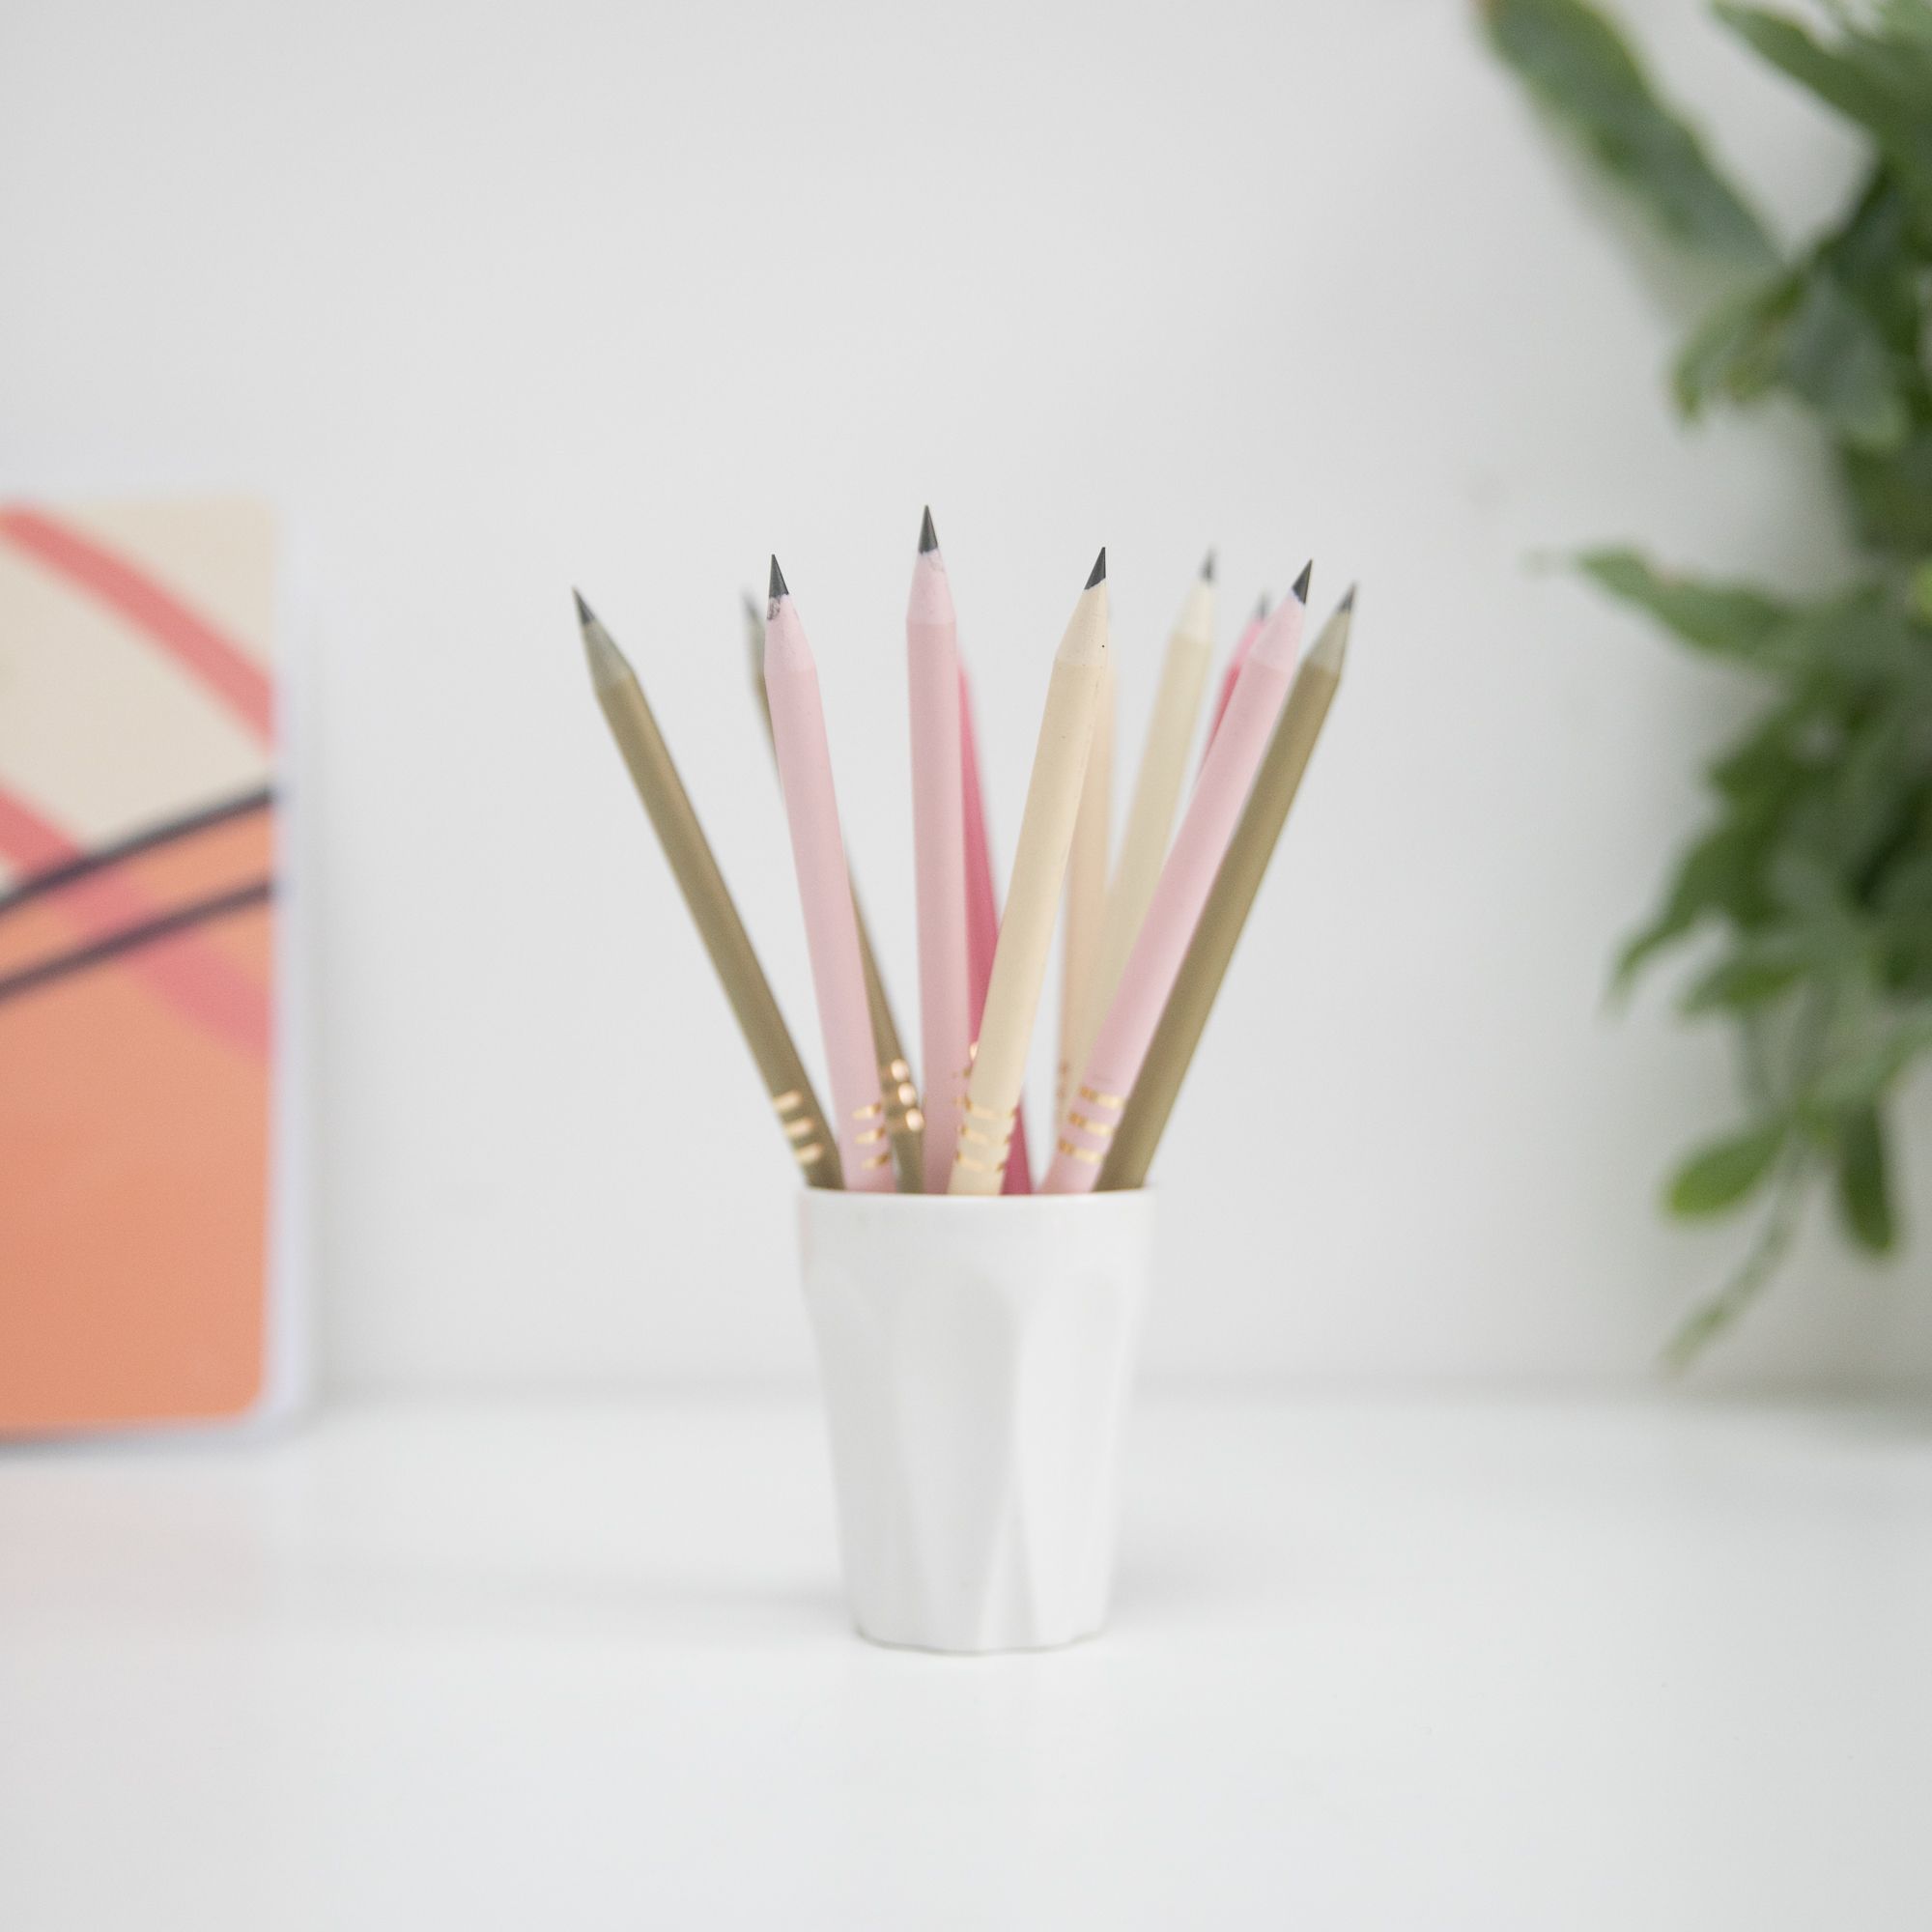 Ideas Collection - Set of 3 Recycled Pencils